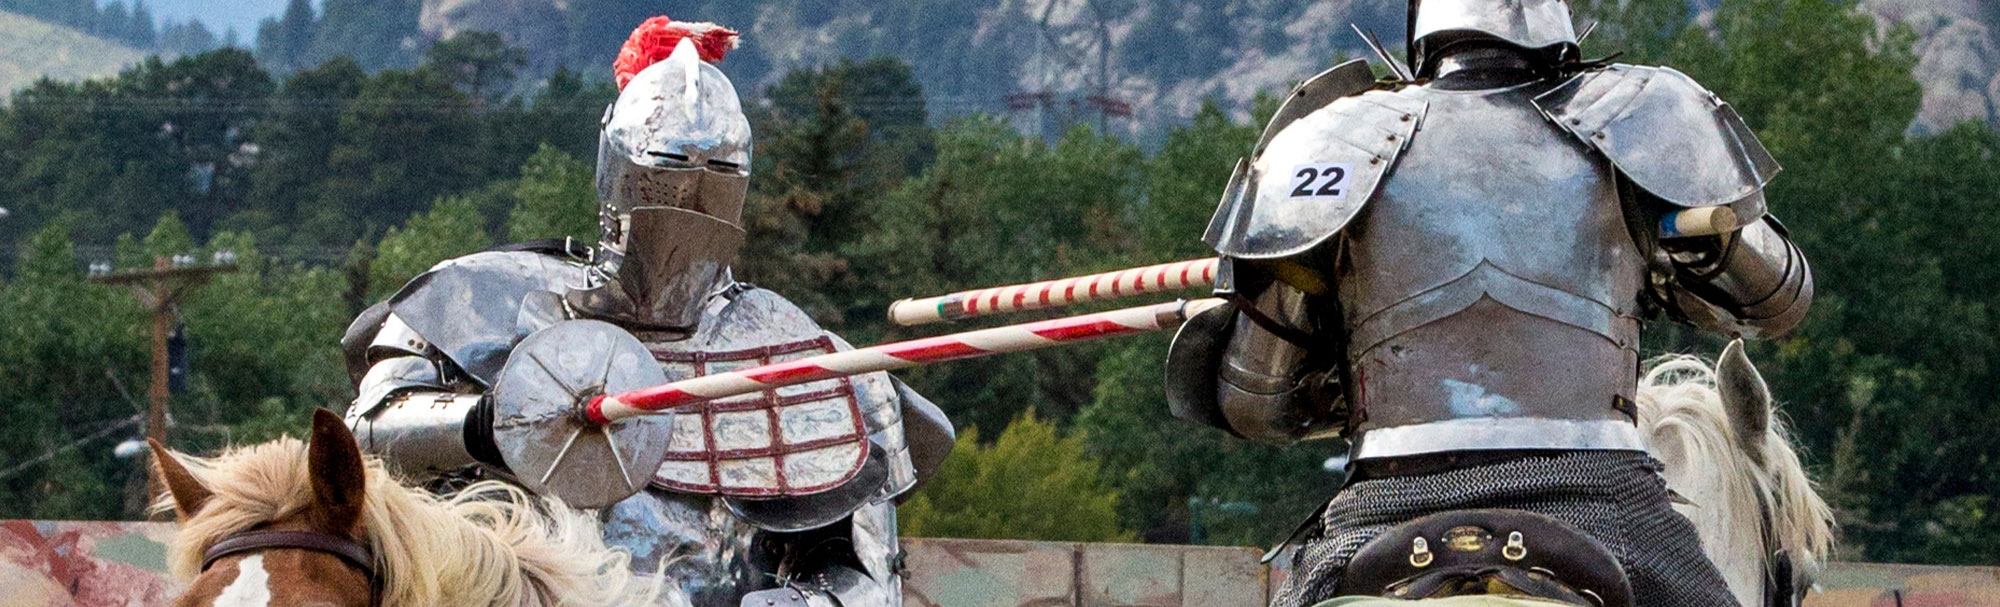 Knights Jousting